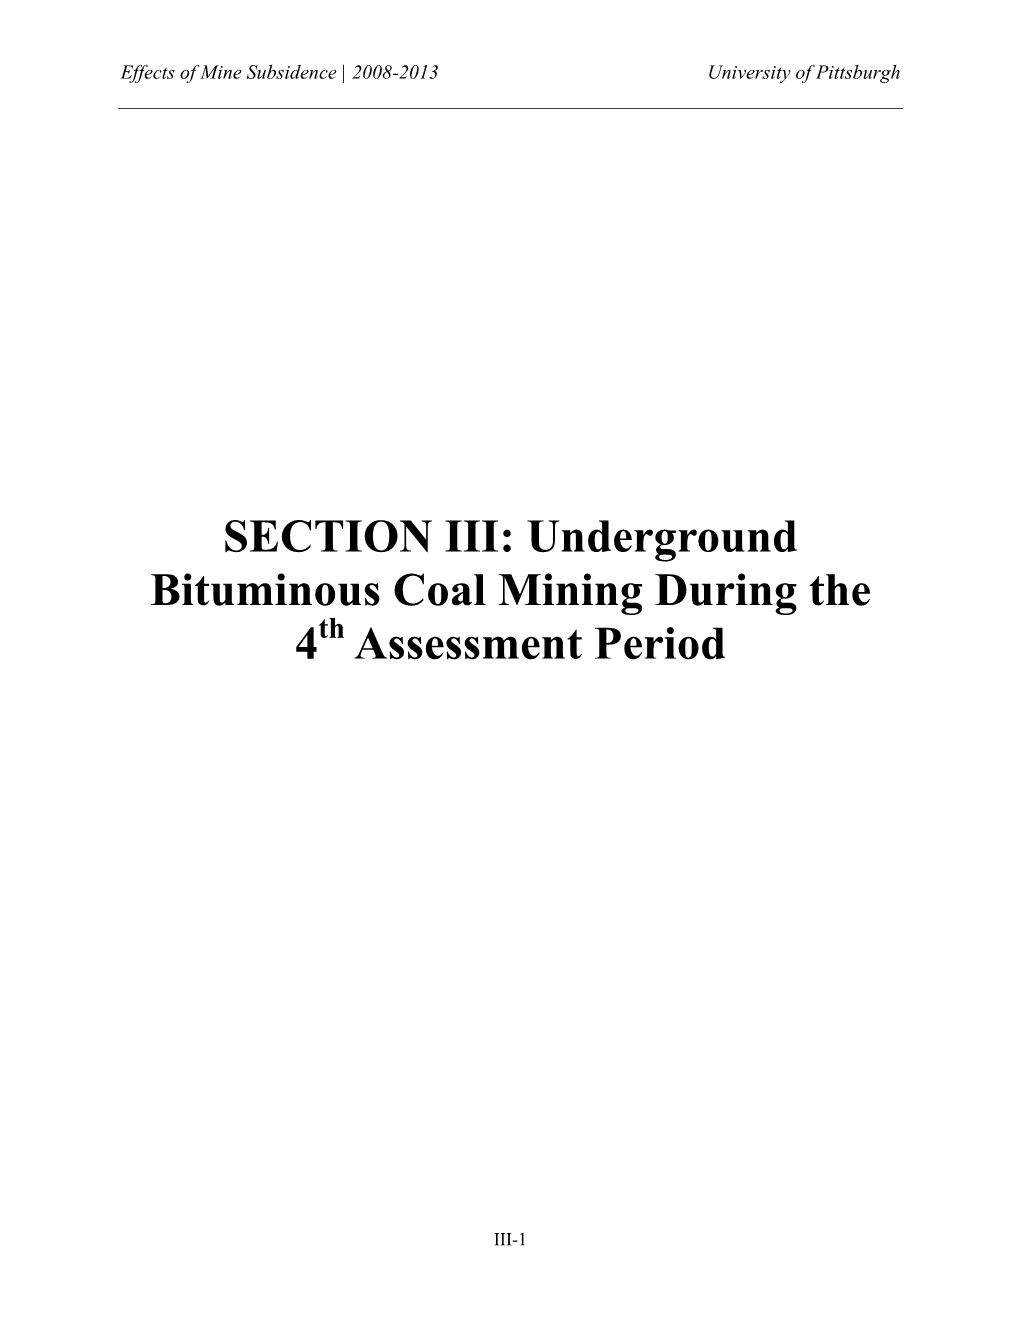 SECTION III: Underground Bituminous Coal Mining During the 4Th Assessment Period